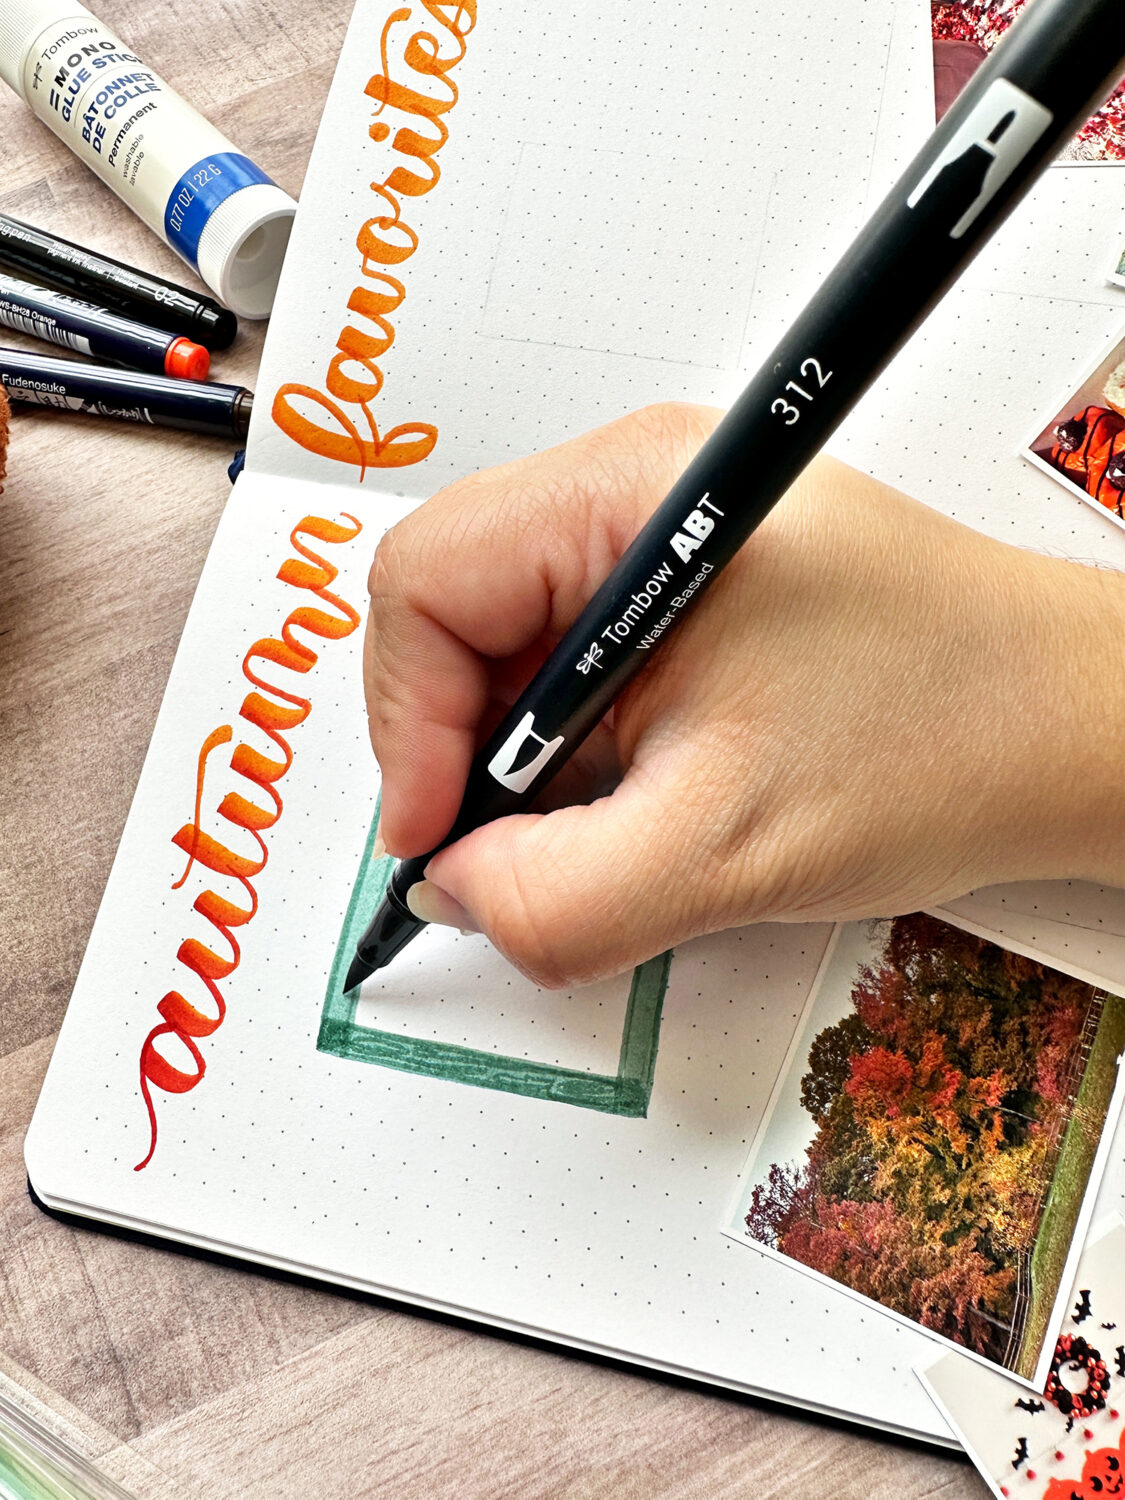 Use the Tombow Dual Brush Pens to create the frames. Go over the main frame with lines to create a woodgrain pattern. Line the frame with the Tombow MONO Drawing Pen and add little circles as screws. #tombow #journaling